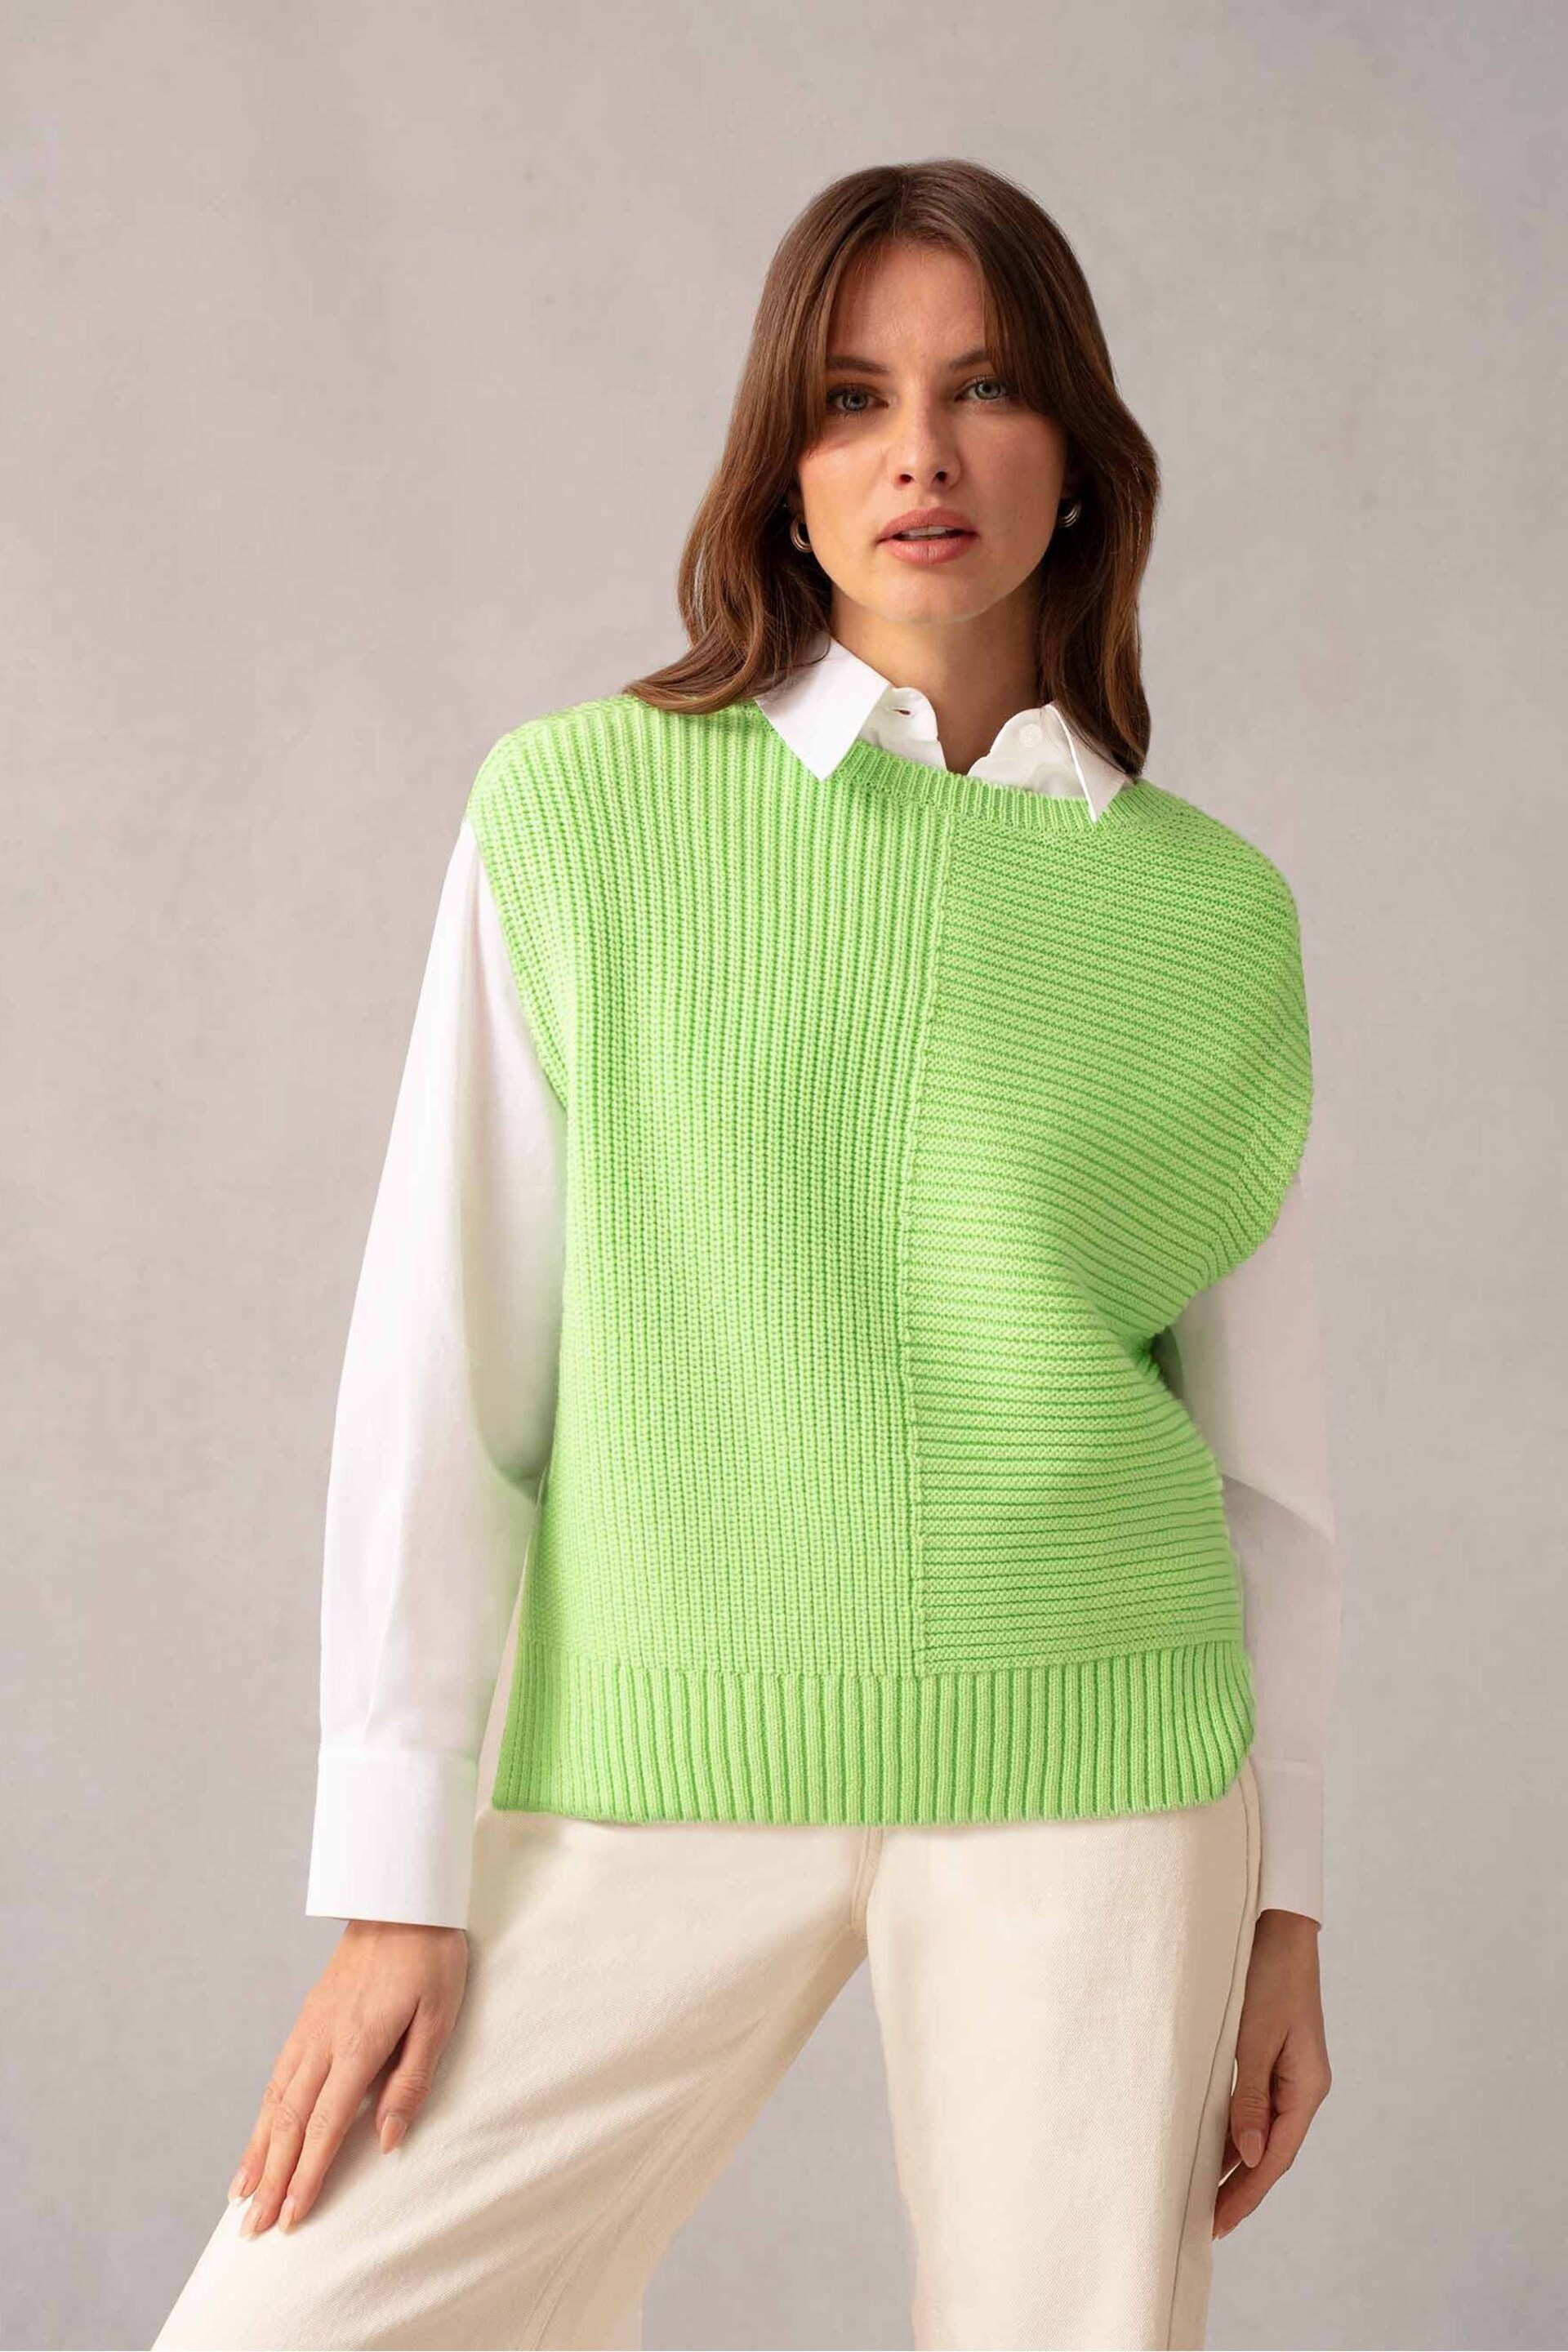 Ro&Zo Oversized Green Knit Tank Top - Image 1 of 6